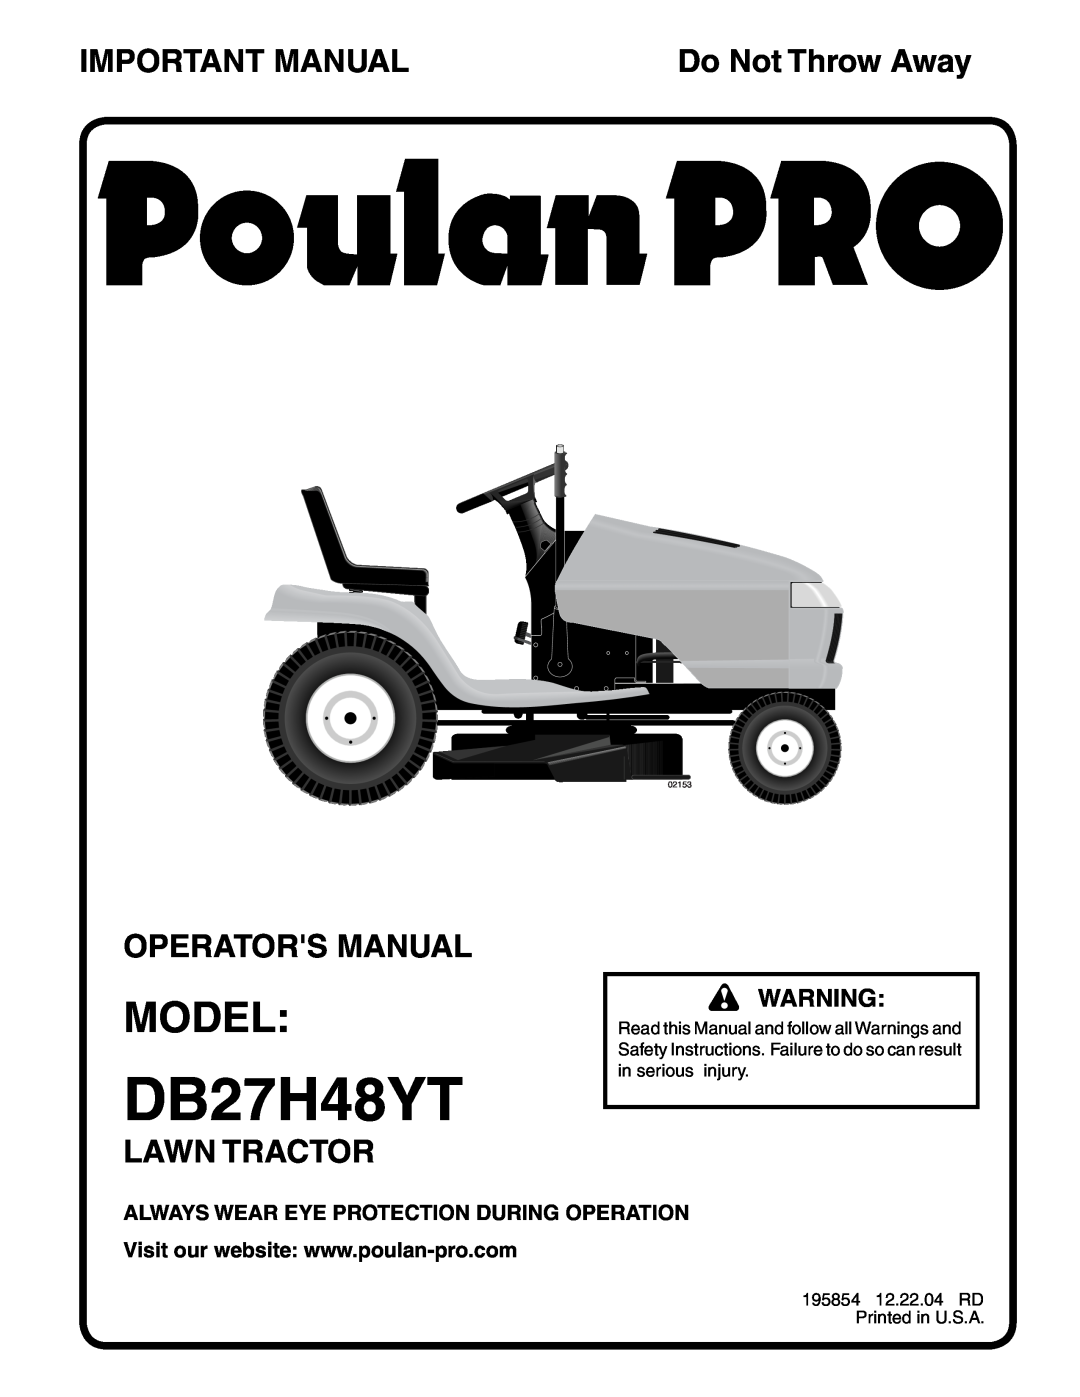 Poulan 195854 manual Model, Important Manual, Operators Manual, Lawn Tractor, Always Wear Eye Protection During Operation 